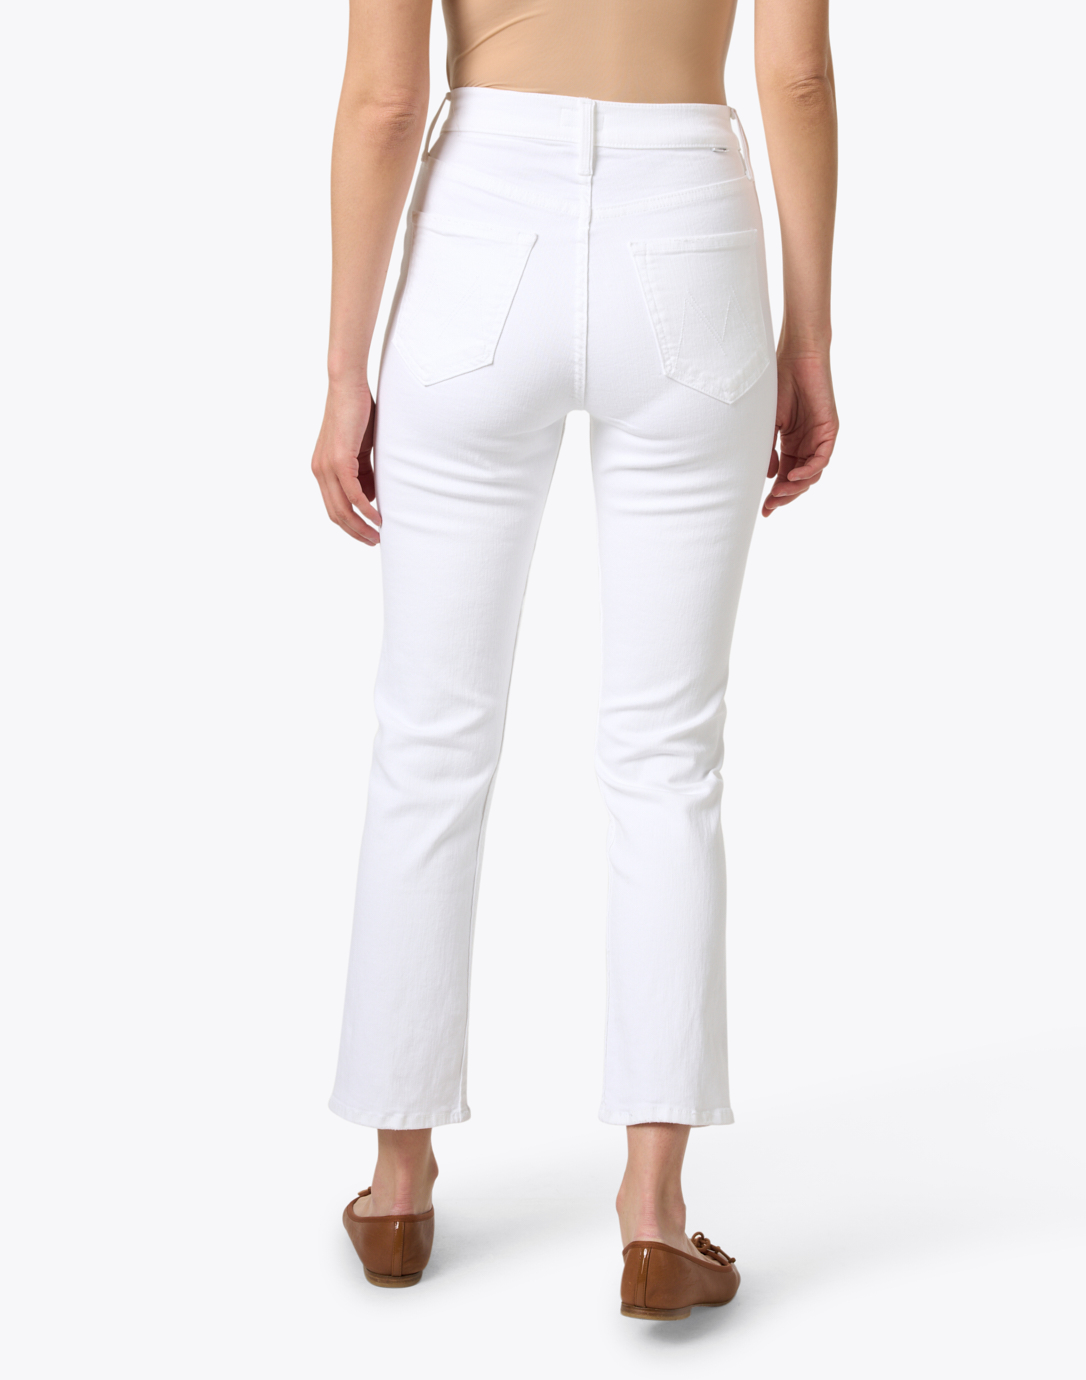 The Rider White High-Waisted Ankle Jean